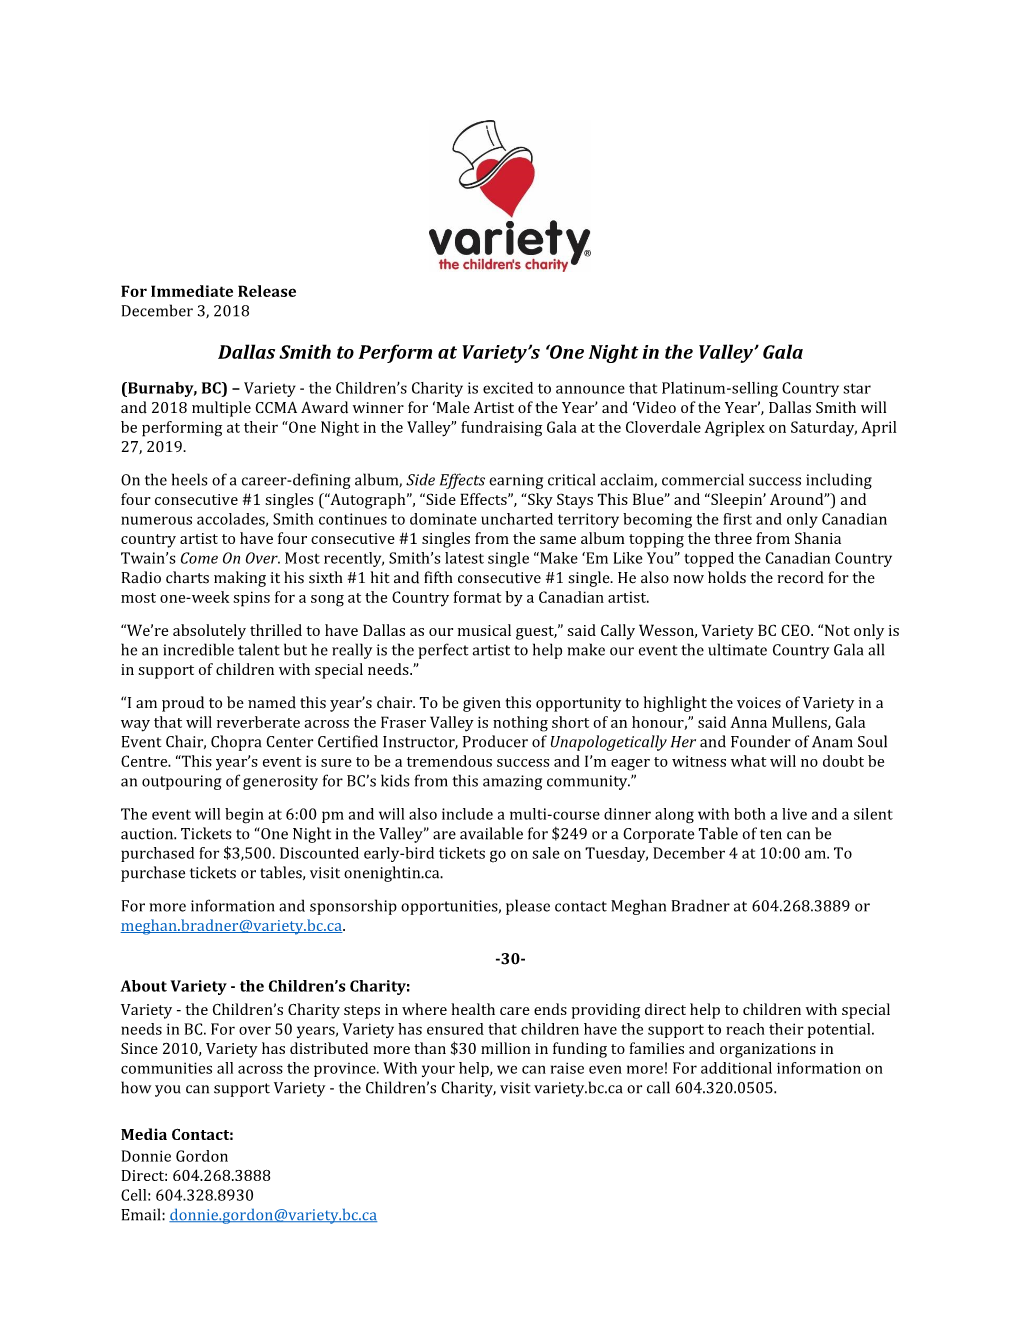 Dallas Smith to Perform at Variety's 'One Night in the Valley' Gala